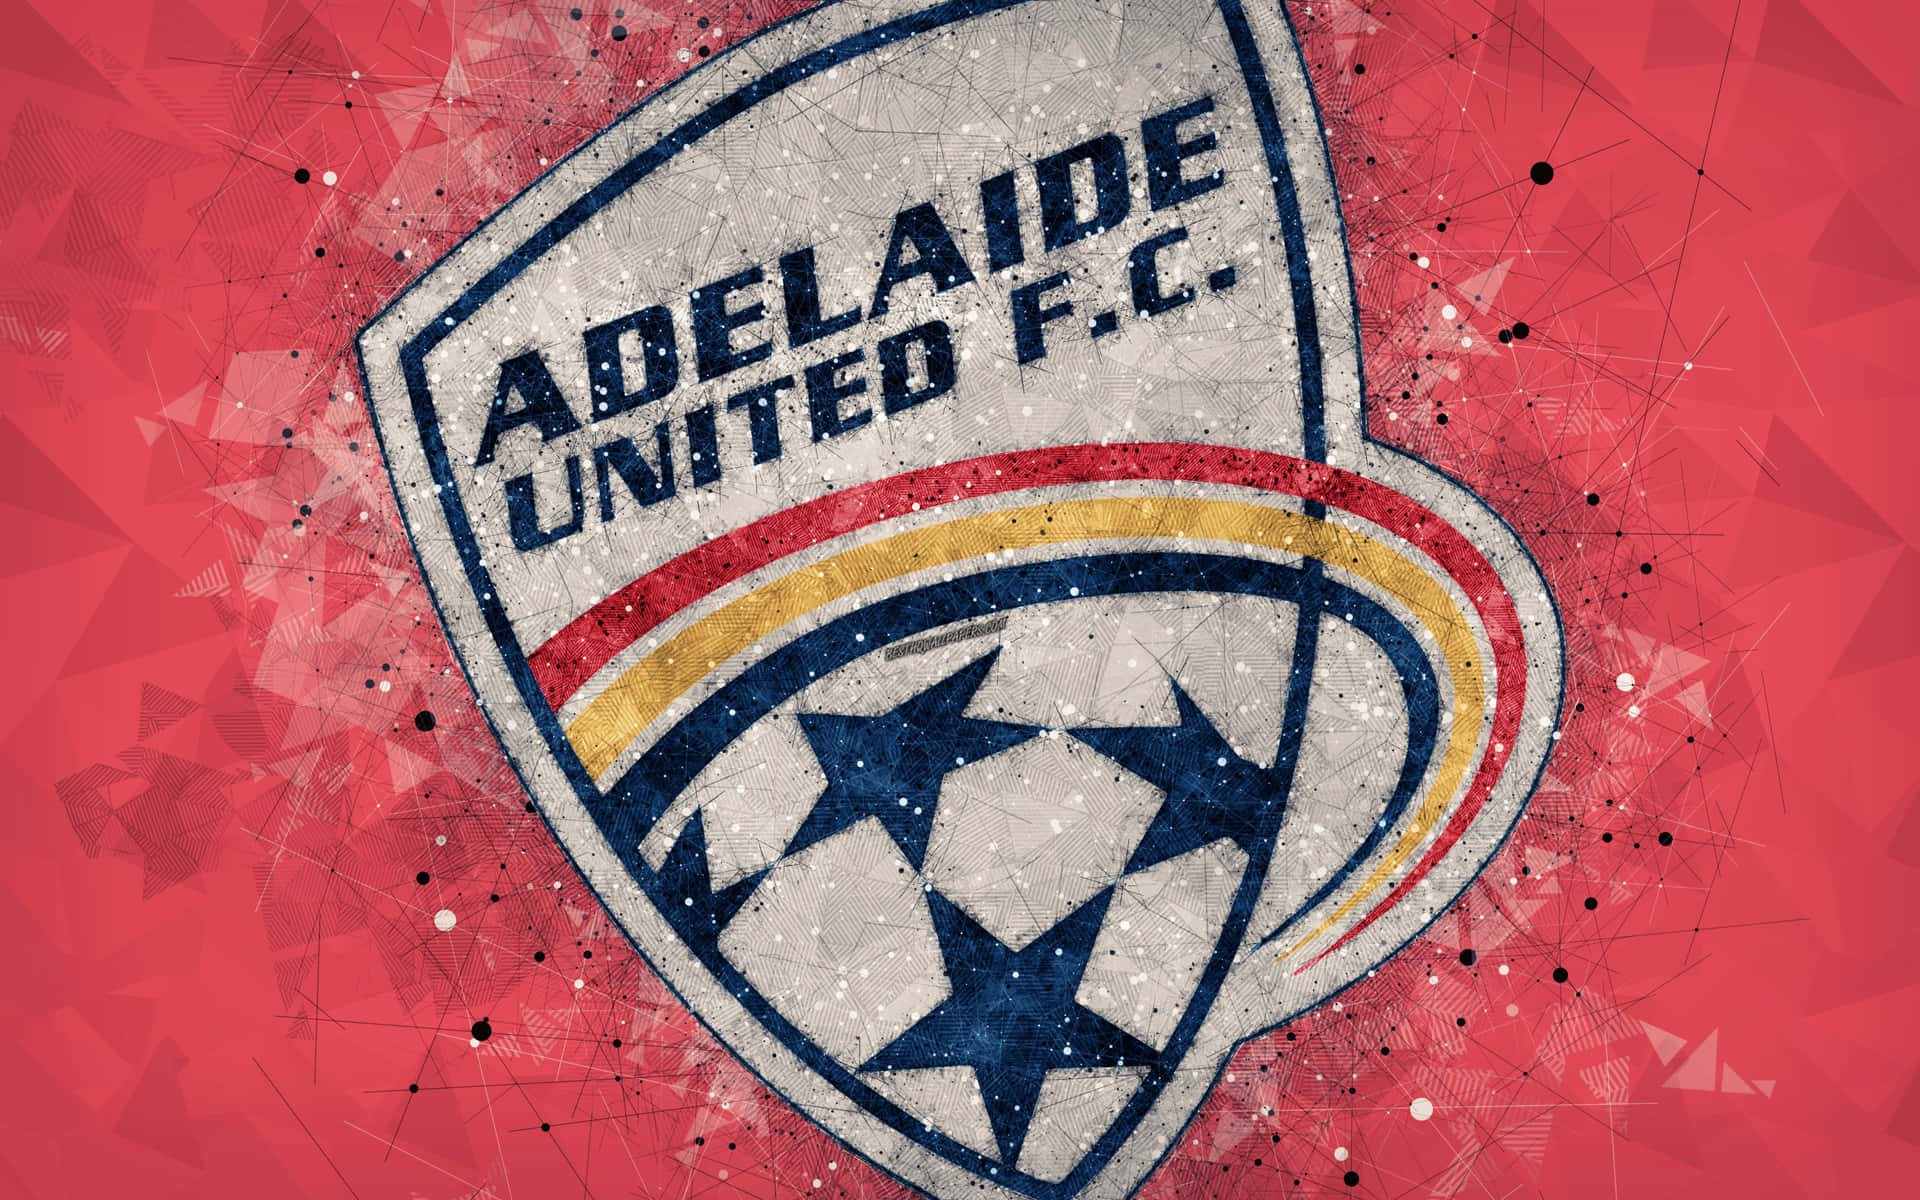 Adelaide United Players in Action Wallpaper